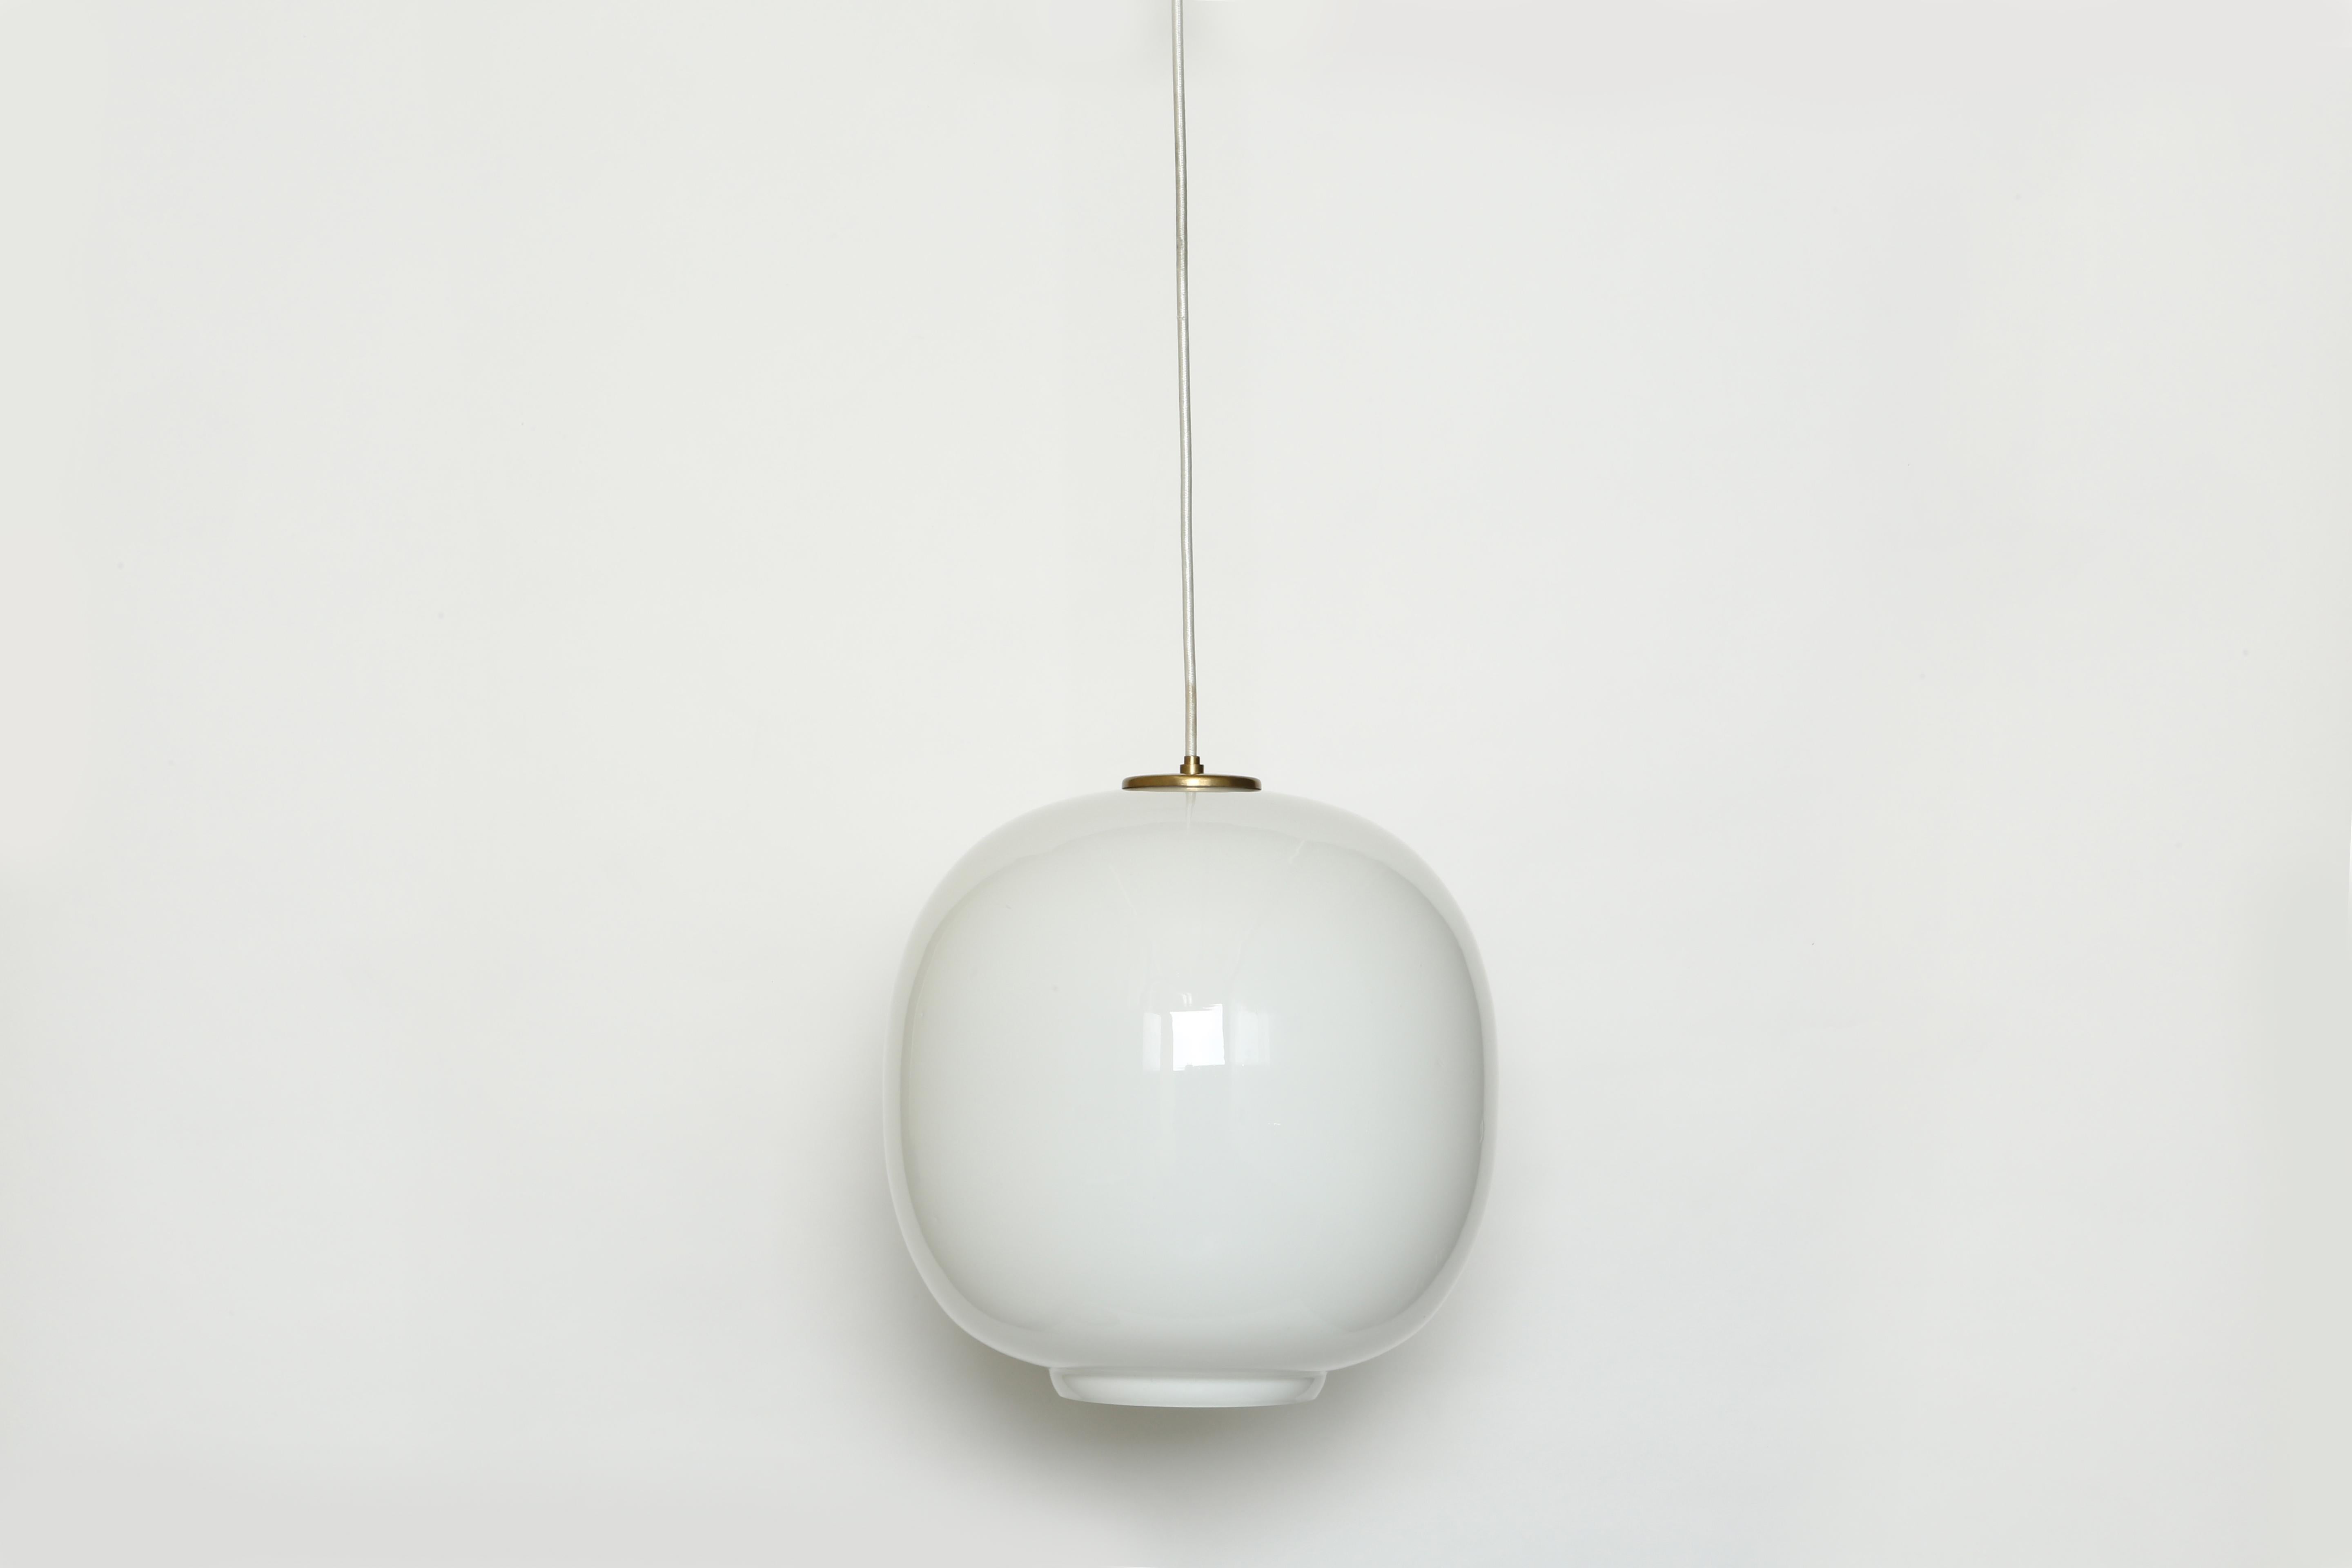 Ceiling pendant by Vilhelm Lauritzen for Louis Poulsen.
Made in Denmark in 1950s. Handmade opaline glass and brass.
Danish architect Vilhelm Lauritzen designed those pendants for Radio House in Copenhagen. 
This is the largest pendant out of the